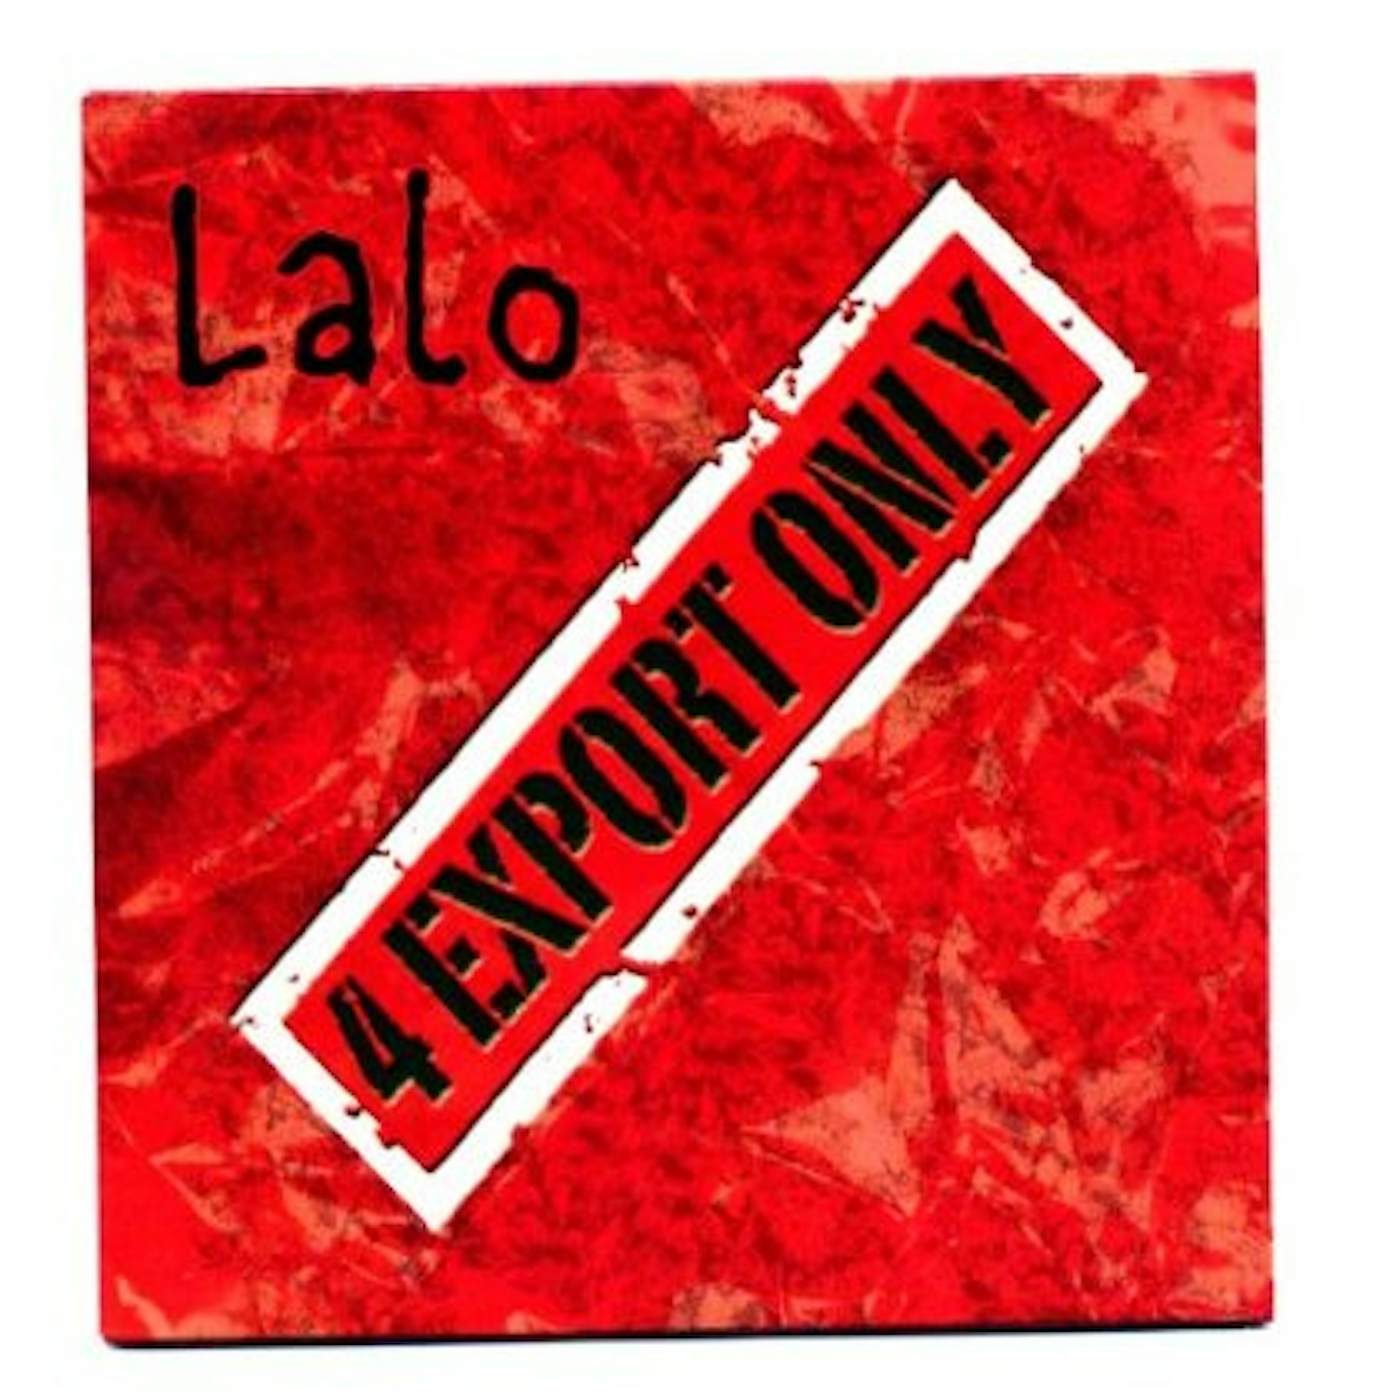 Lalo 4 EXPORT ONLY CD